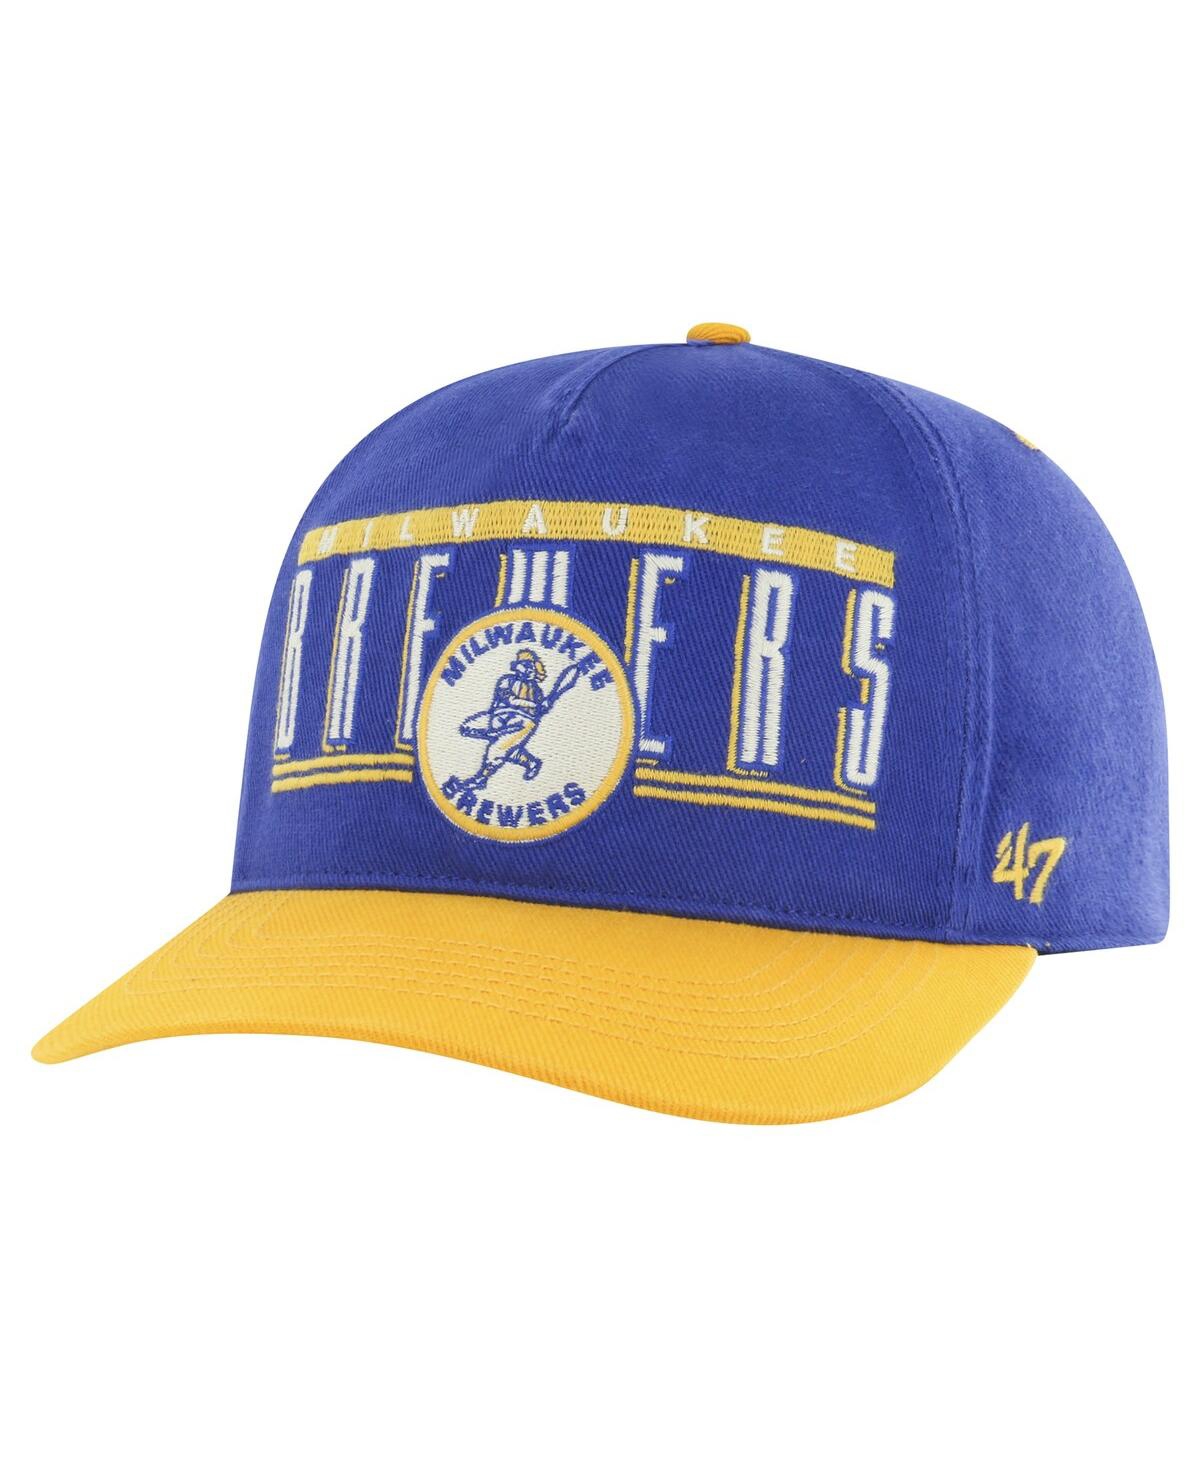 47 Brand Men's Royal Milwaukee Brewers Double Headed Baseline Hitch Adjustable Hat - Royal